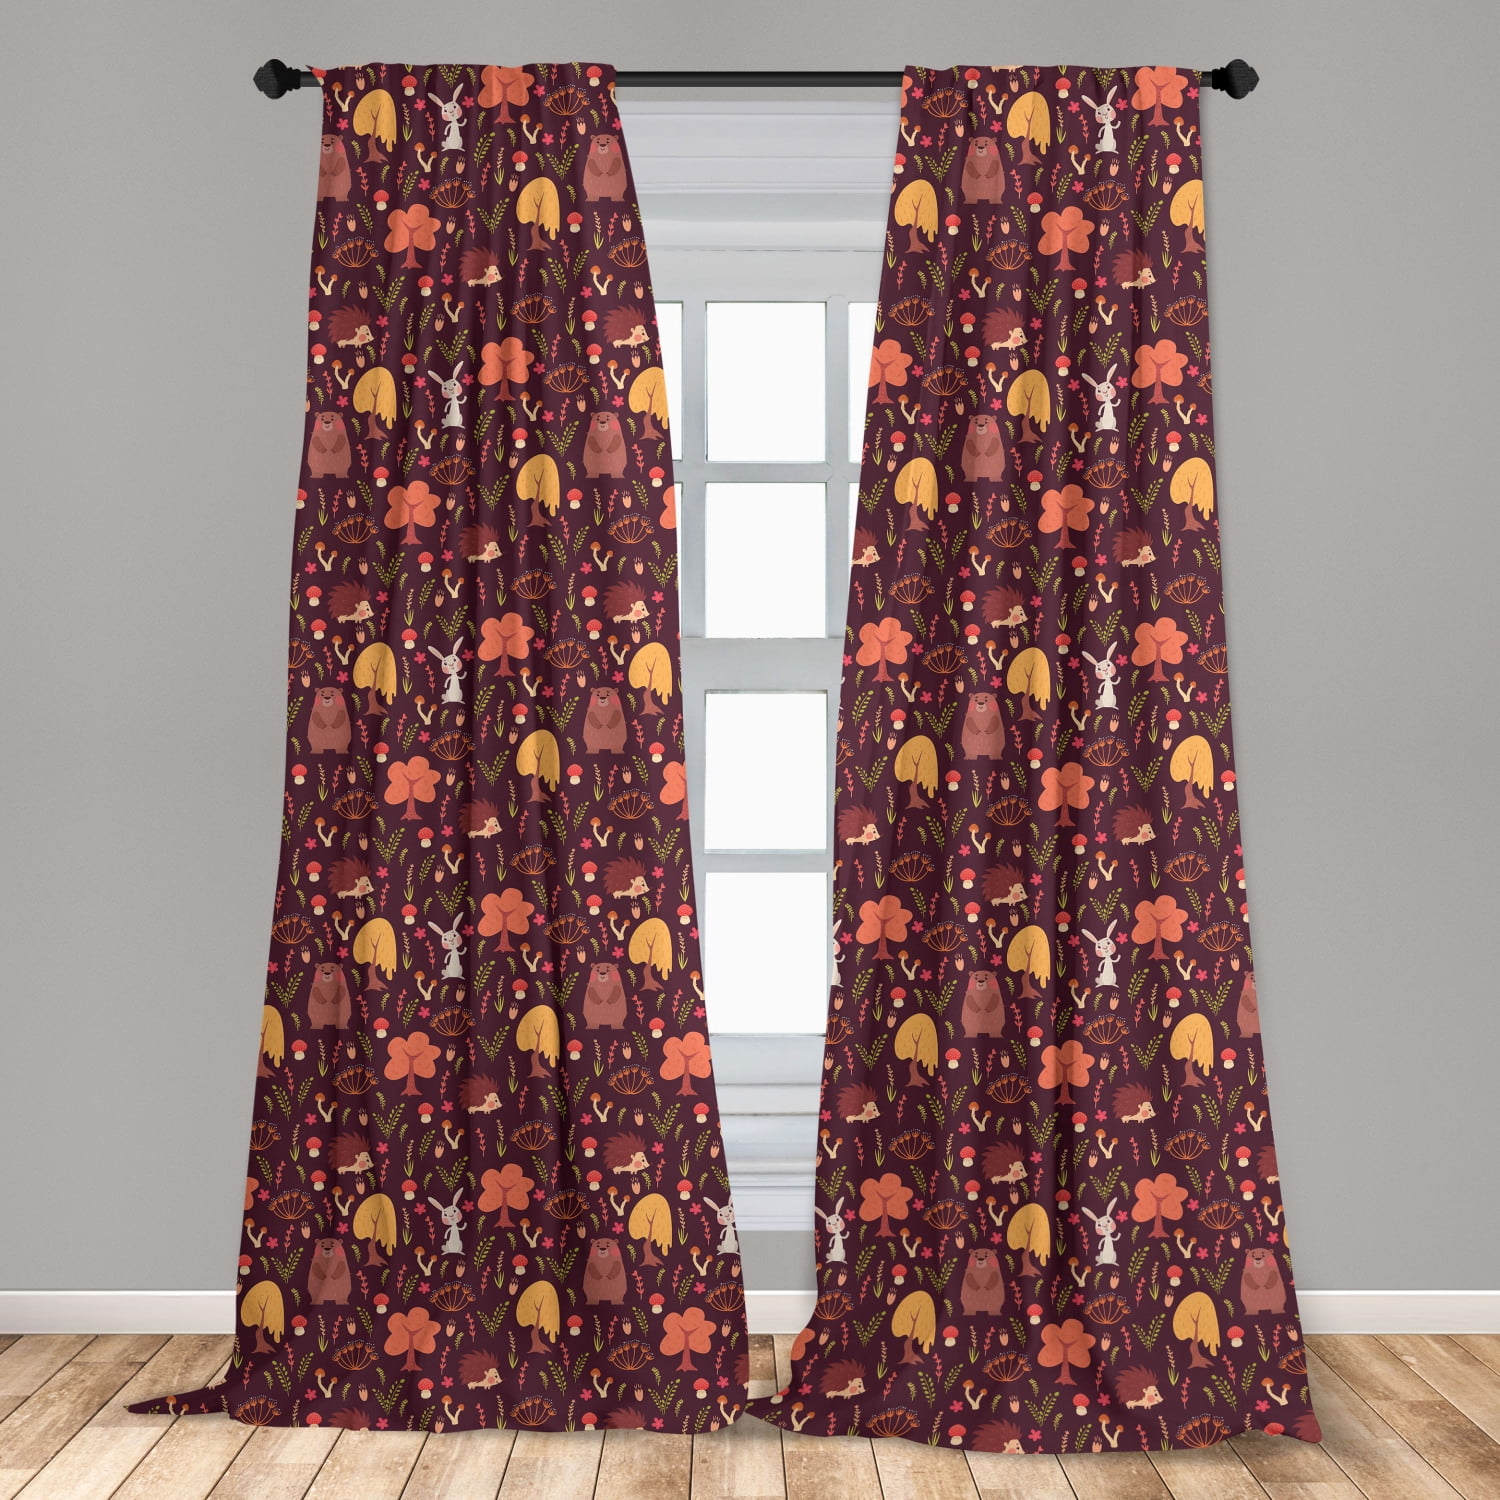 Light Filtering Voile Curtain Privacy Treatment Drapes for Bedroom Living Room Decor Vintage Autumn Leaves Linen Texture Semi Sheer Window Curtain Panels Thanksgiving Orange Maple Leaf 